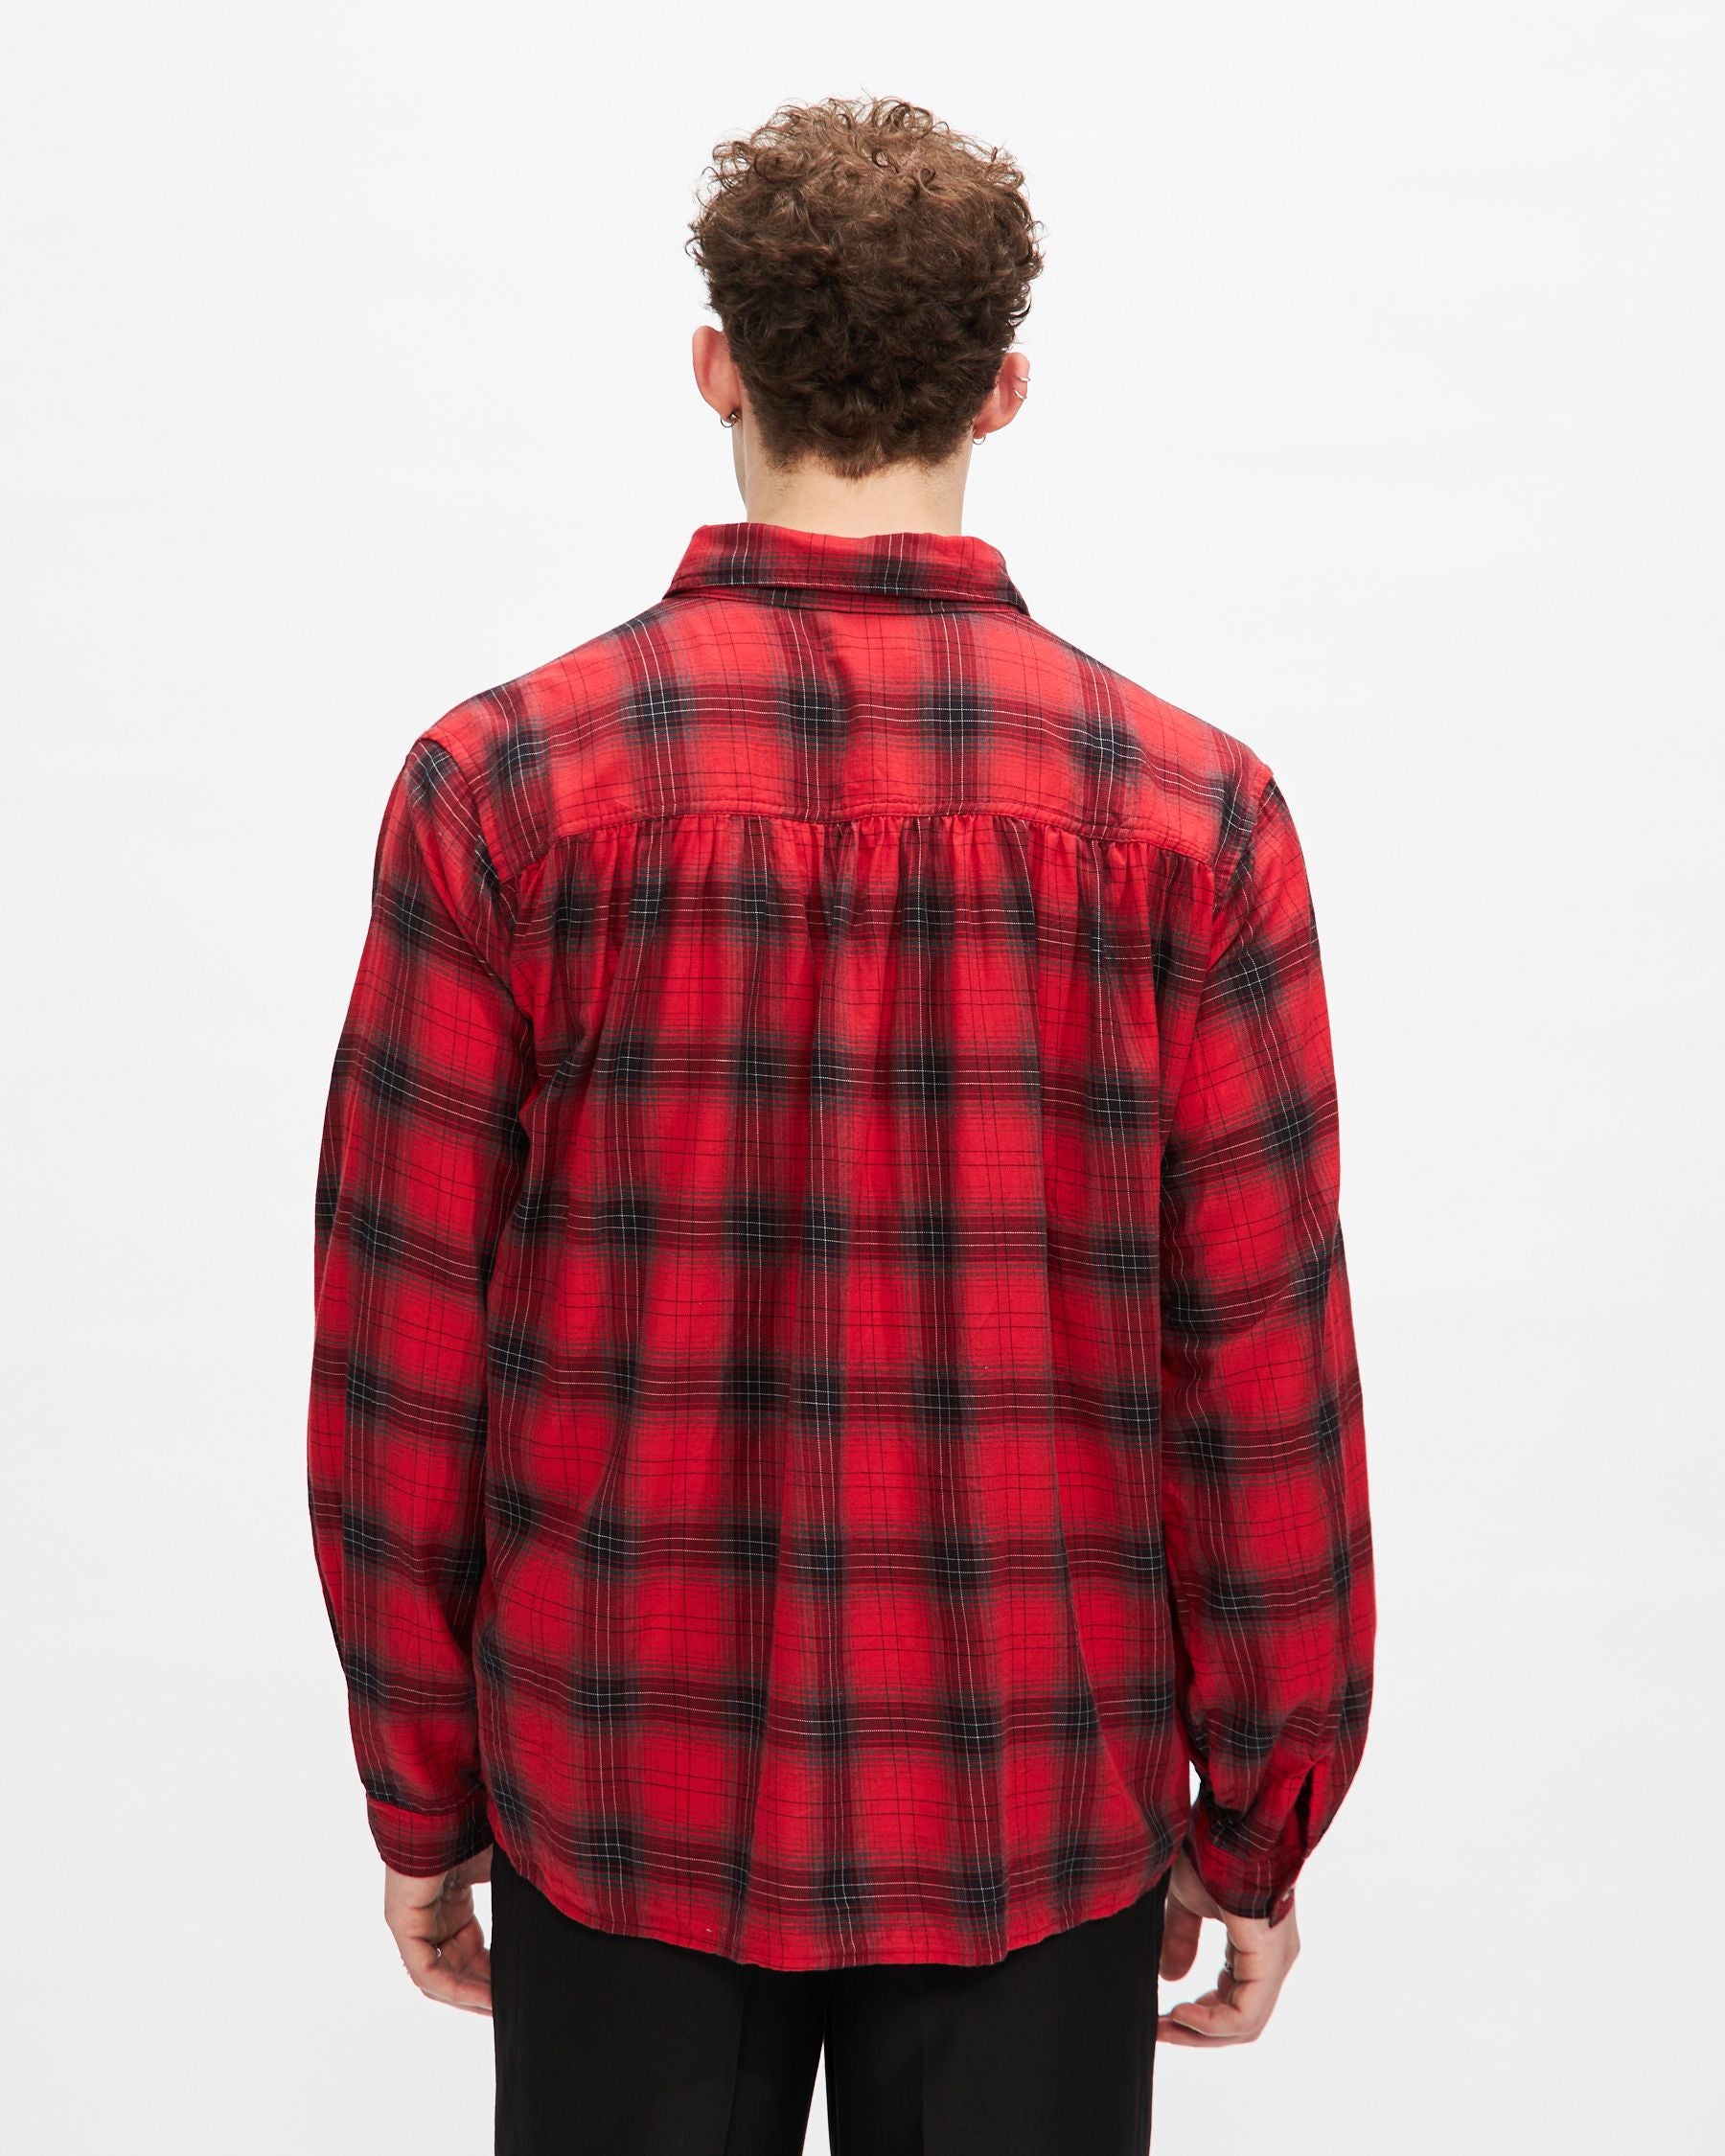 Picasso Shirt in Red Plaid Cashmere Cotton